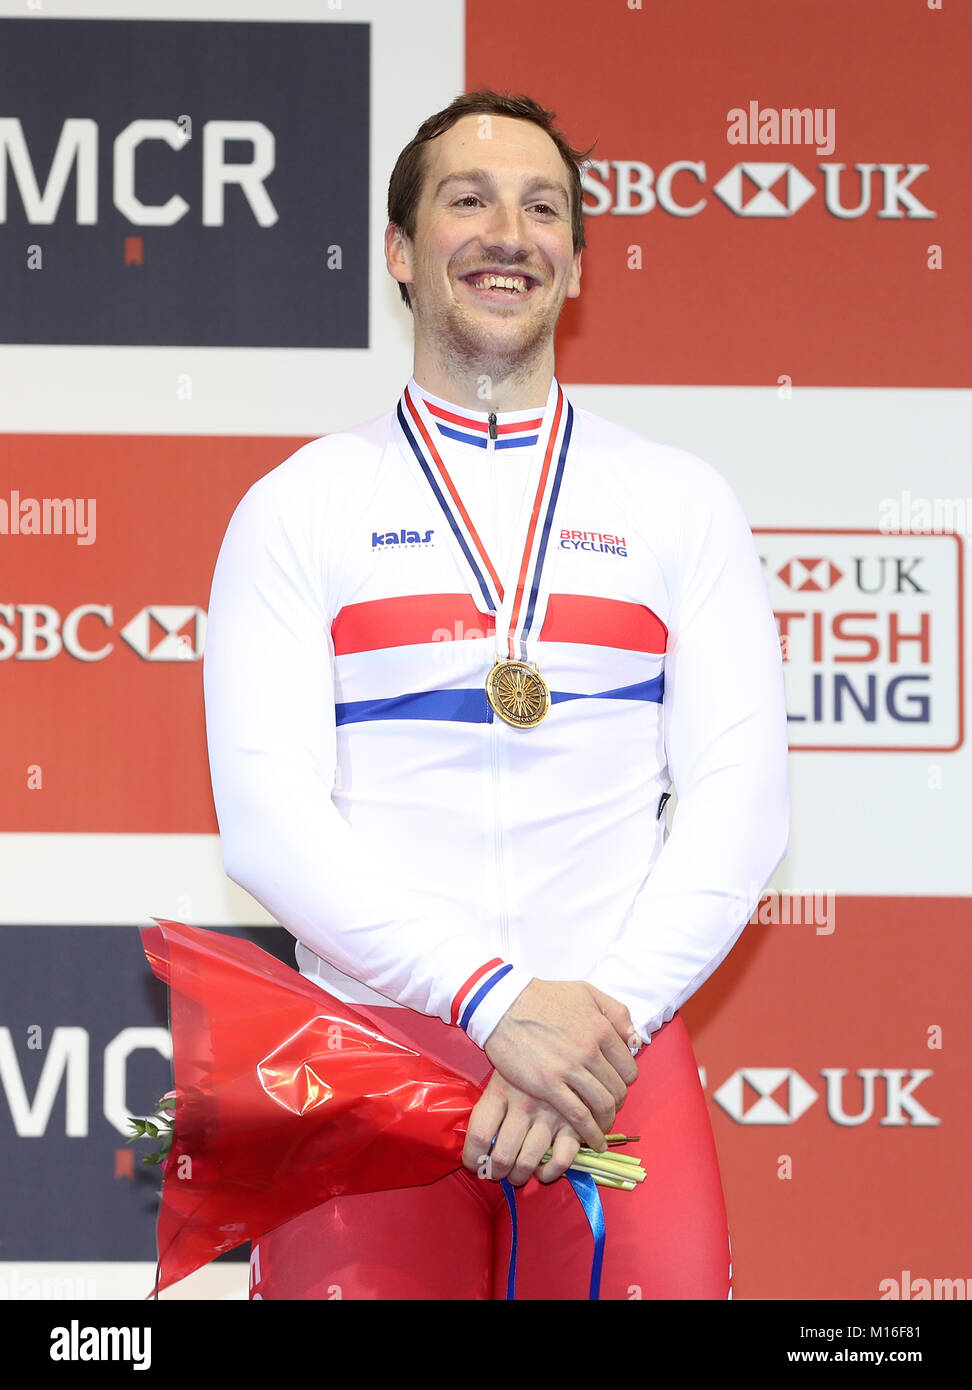 Lewis Oliva celebrates with his gold medal after winning the Men's Keirin Final, during day one of the HSBC UK National Track Championships at The National Cycling Centre, Manchester. PRESS ASSOCIATION Photo. Picture date: Friday January 26, 2018. Photo credit should read: Martin Rickett/PA Wire. Stock Photo